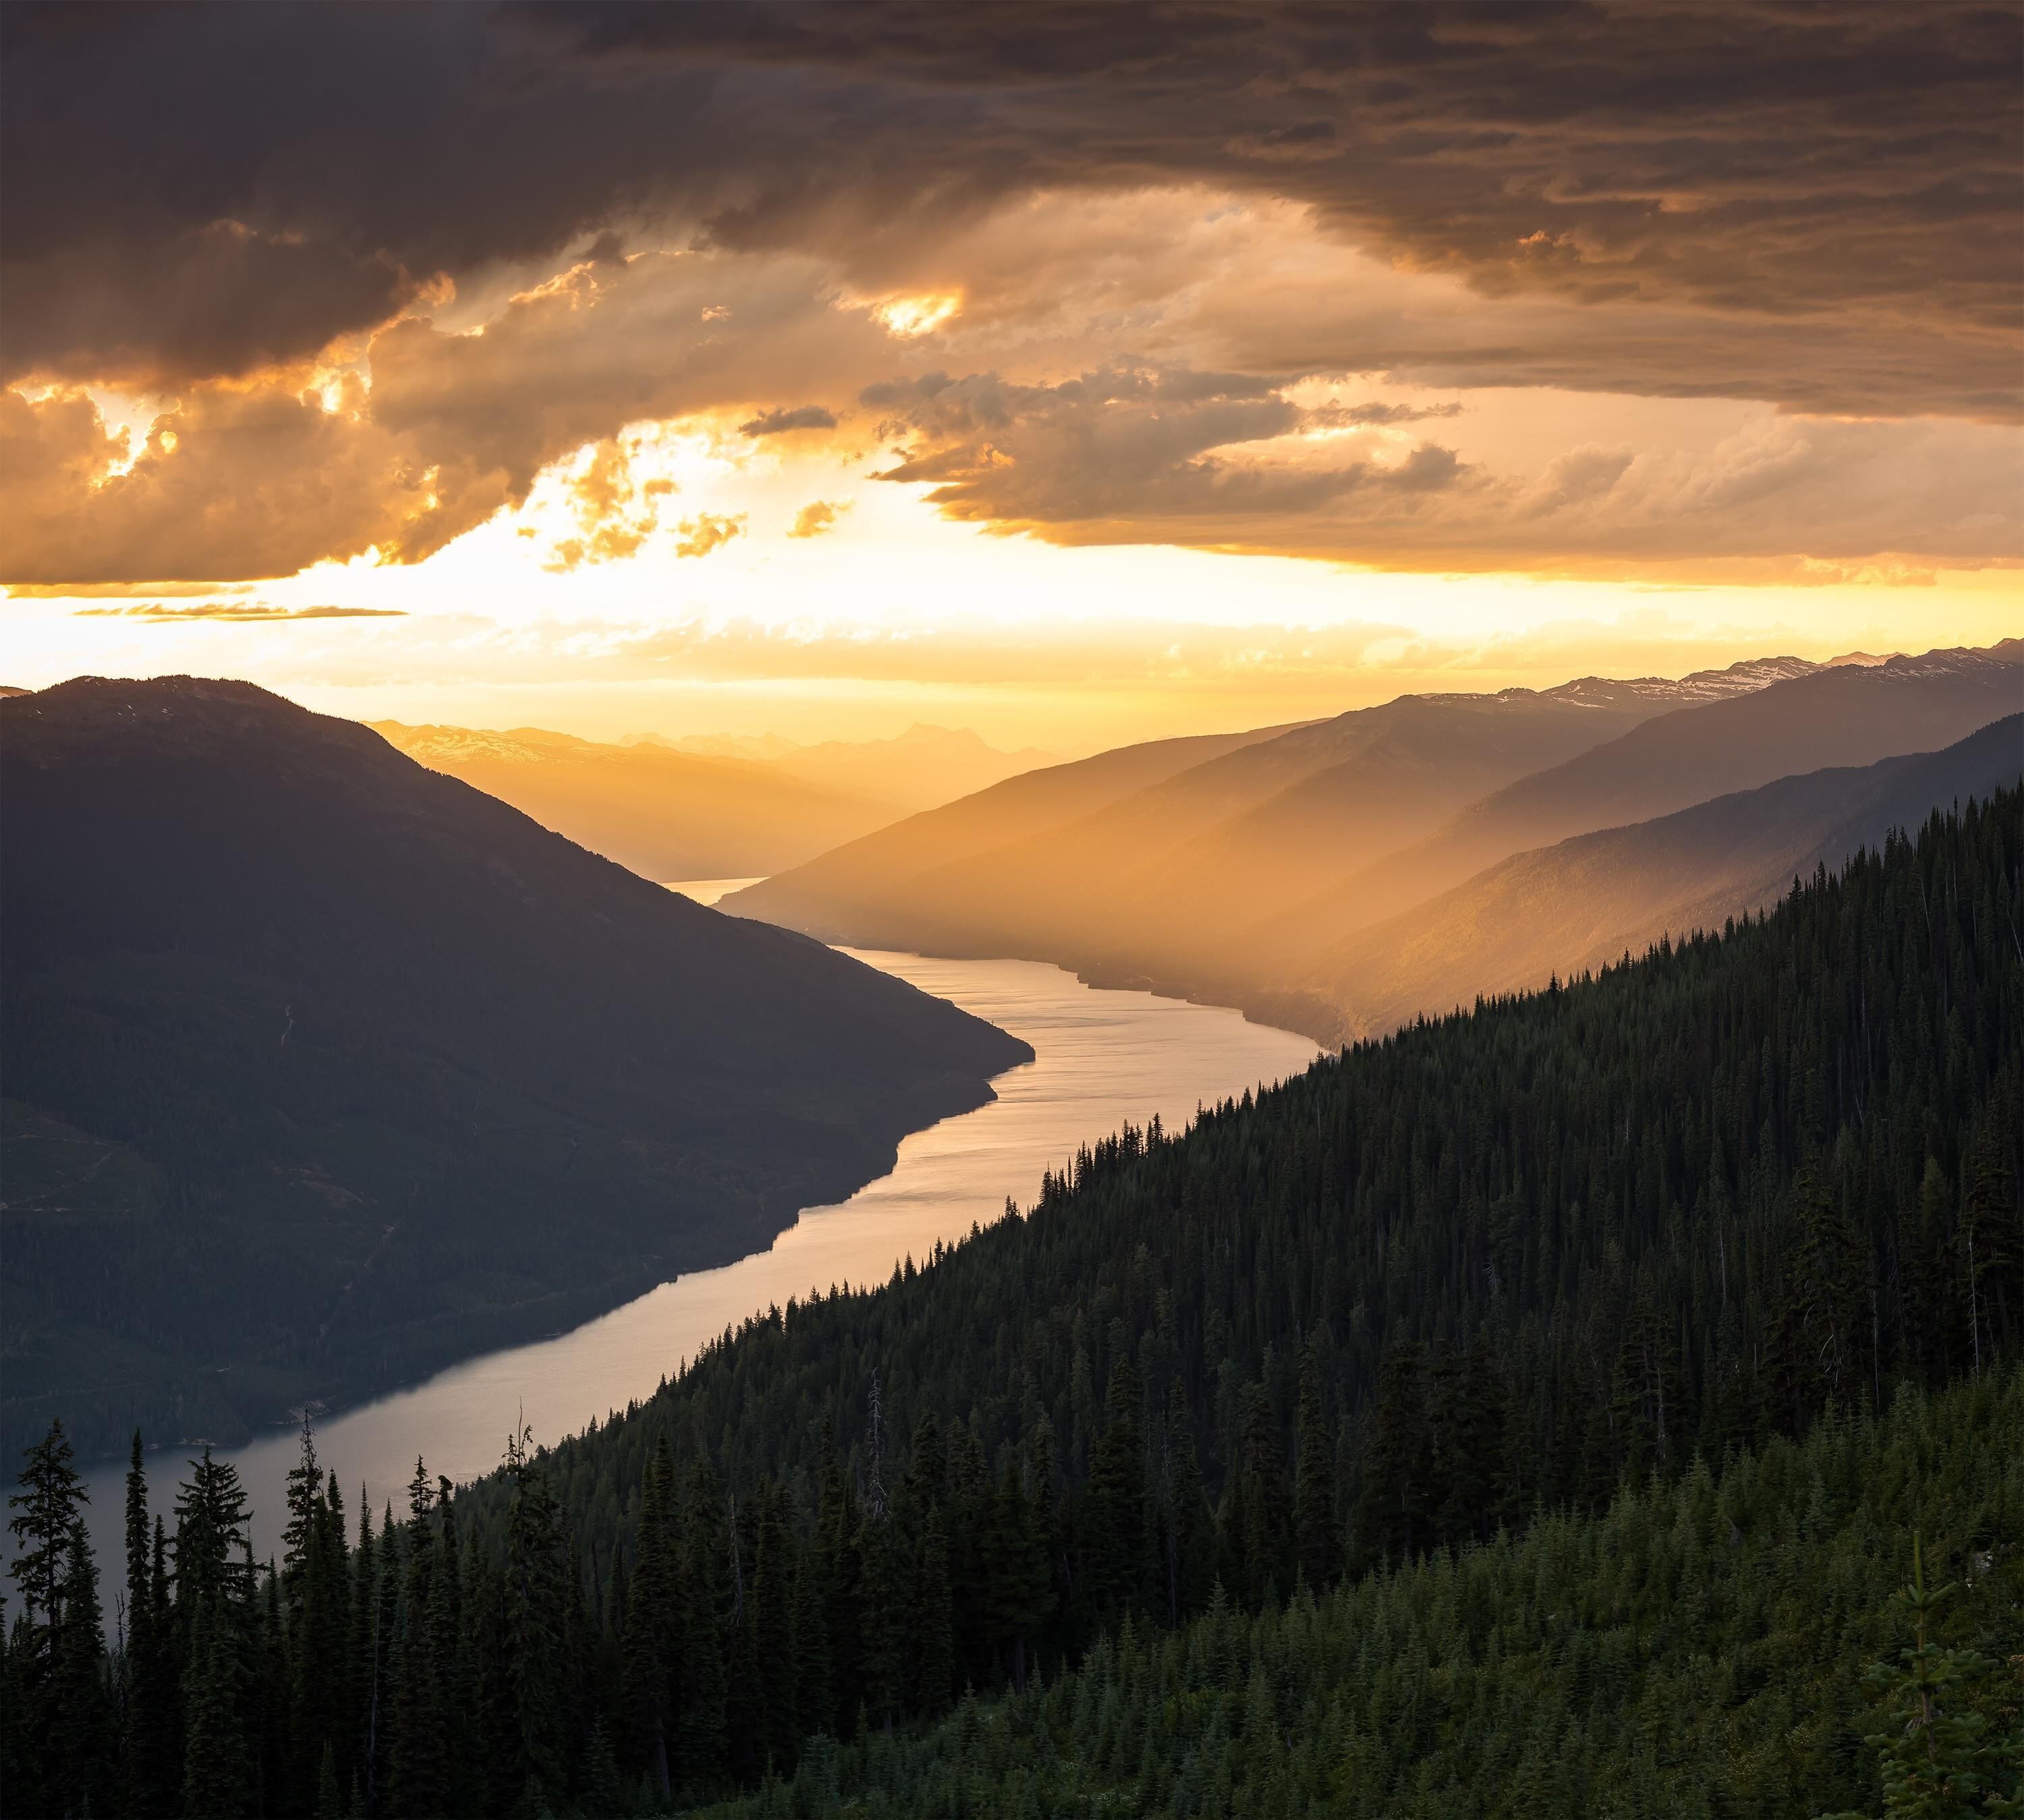 body of water between mountains, Revelstoke, mountains, river, sunset